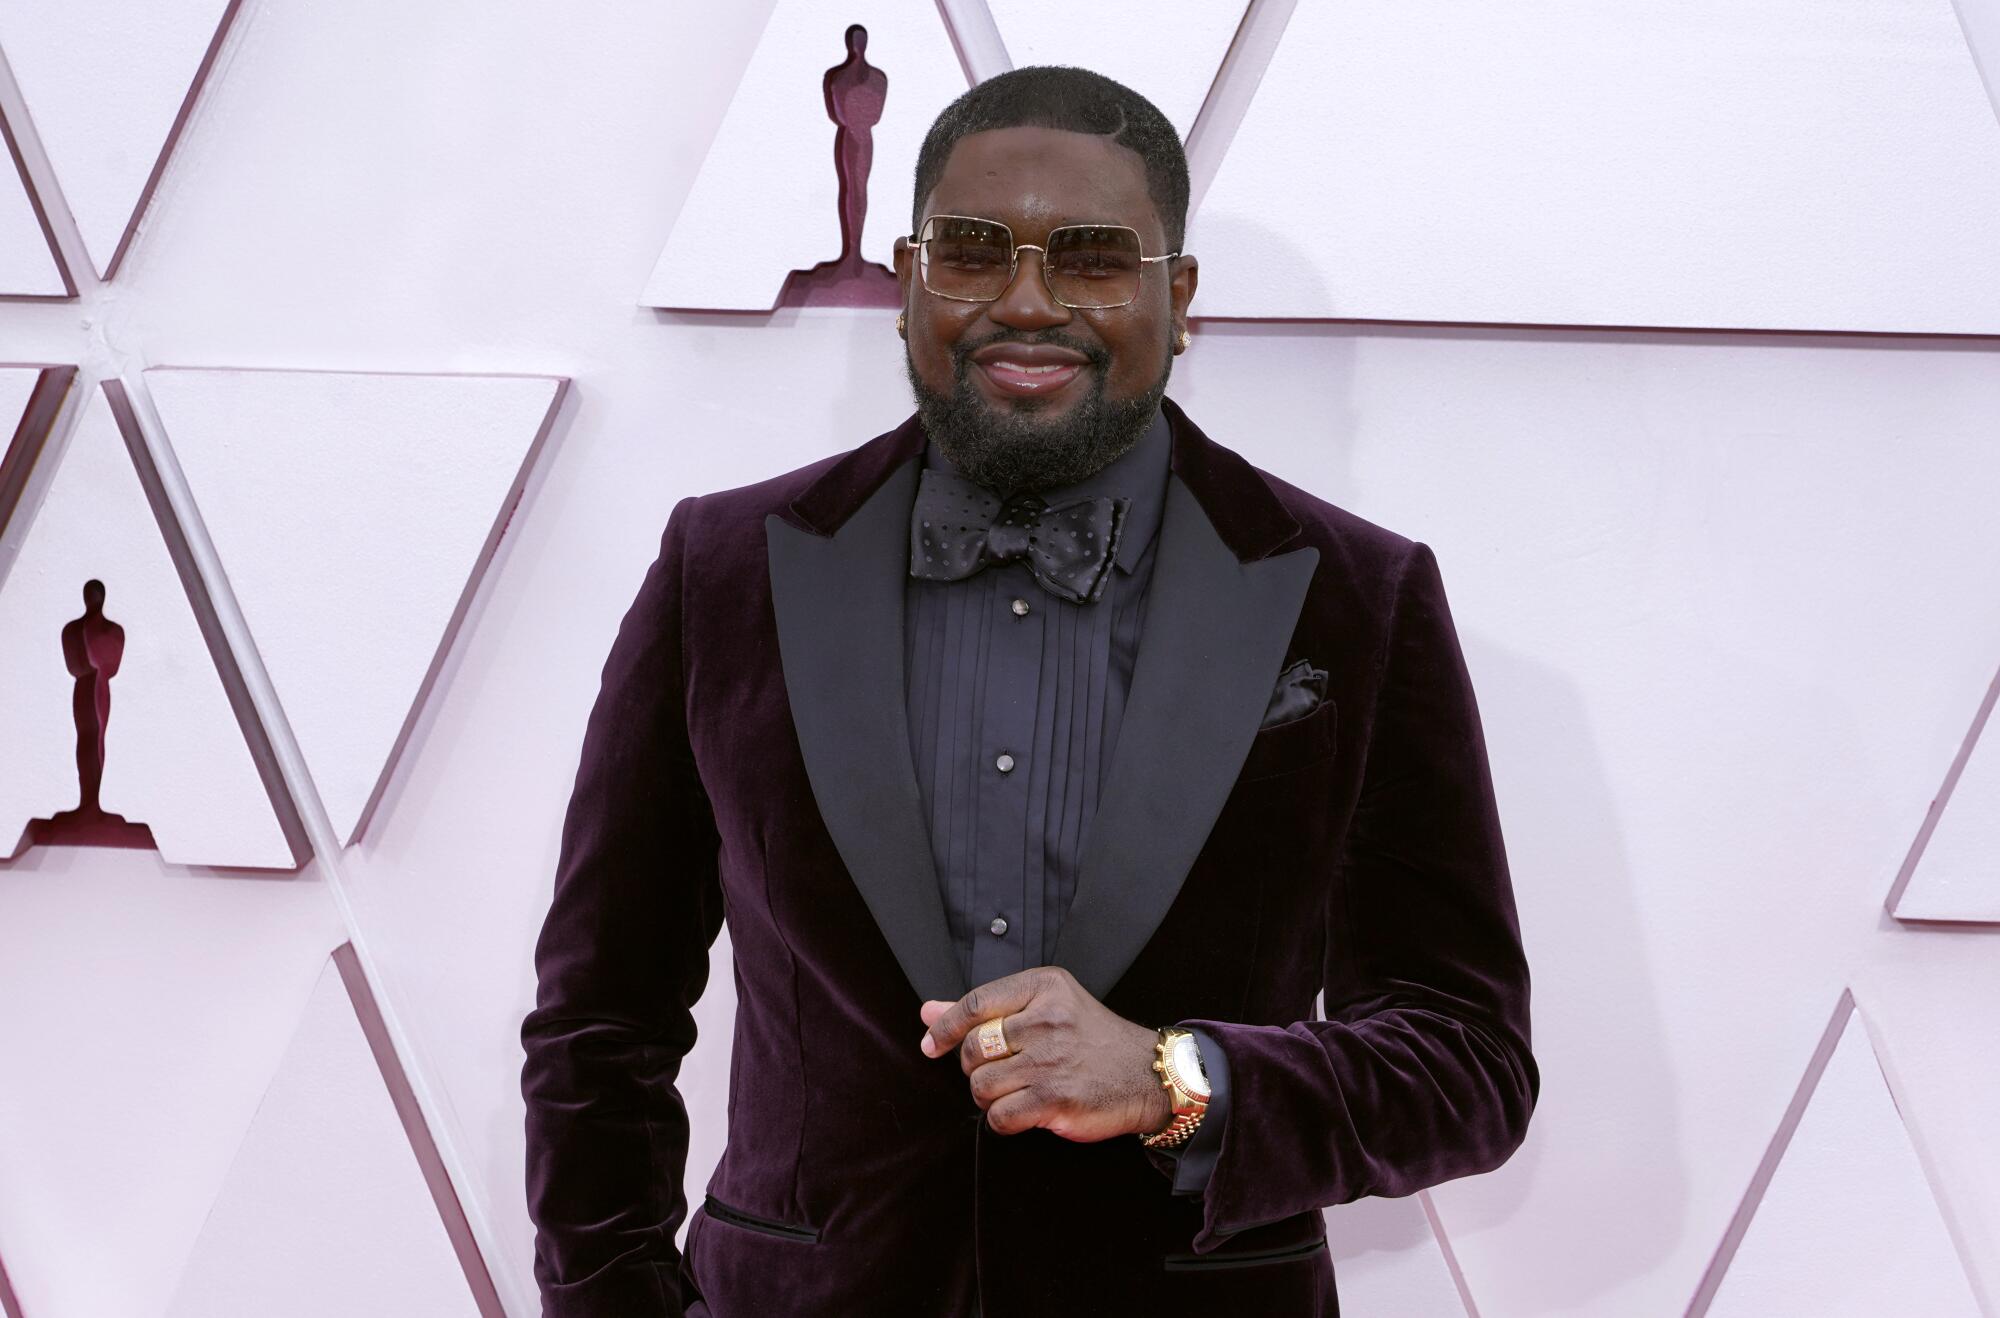 Lil Rel Howery arrives at the Oscars in a black shirt and bow tie and purple jacket.